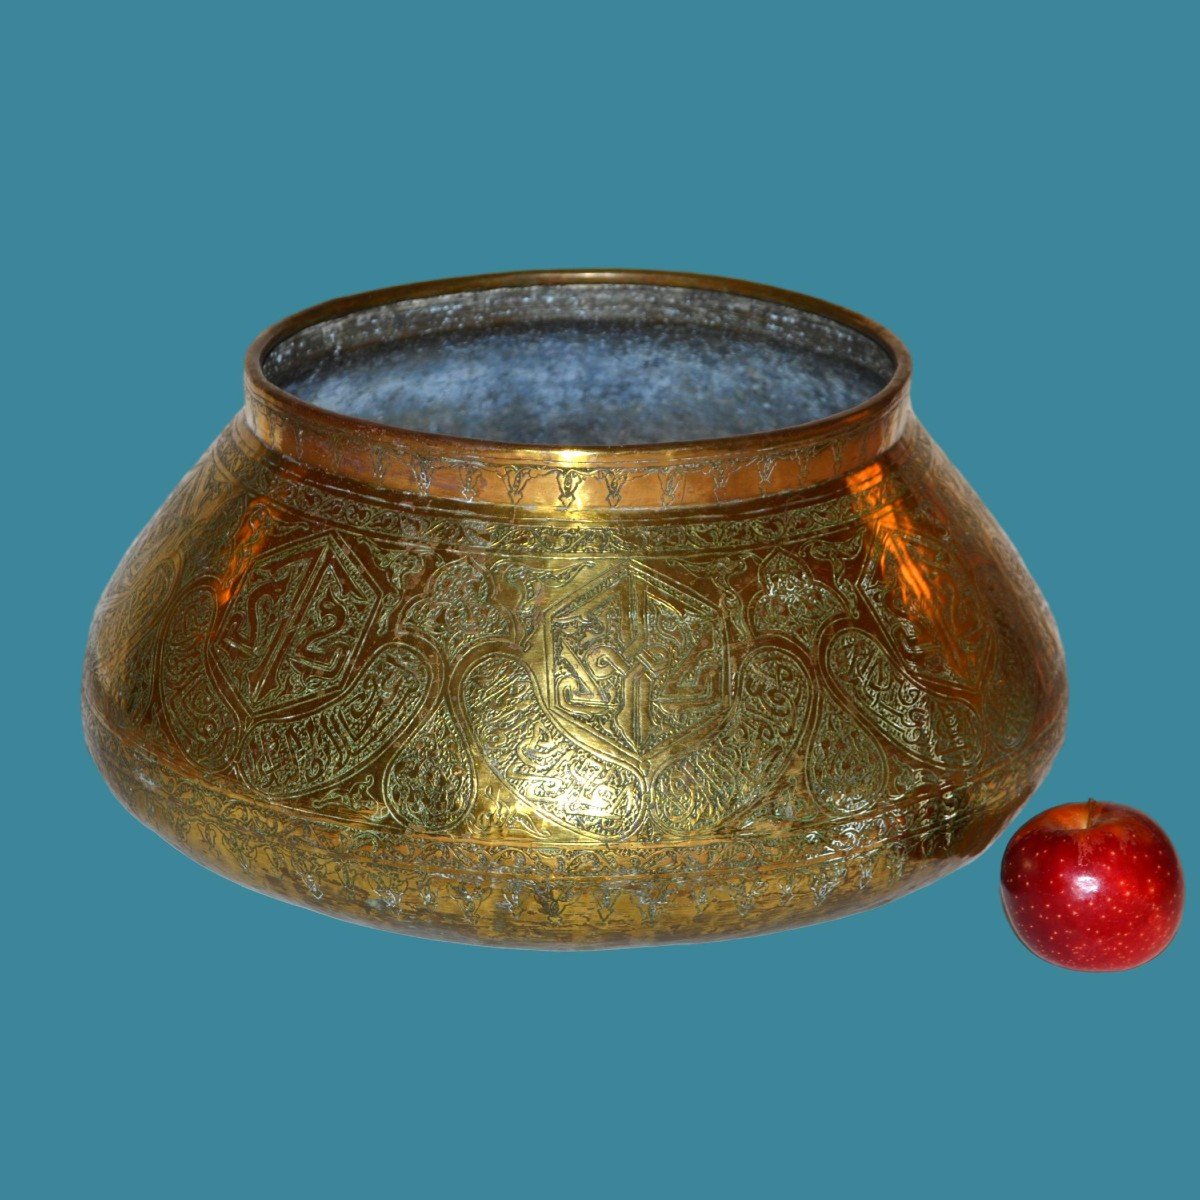 Very Important Oriental Basin, "heap" In Chiseled Brass, Middle East From The 19th Century